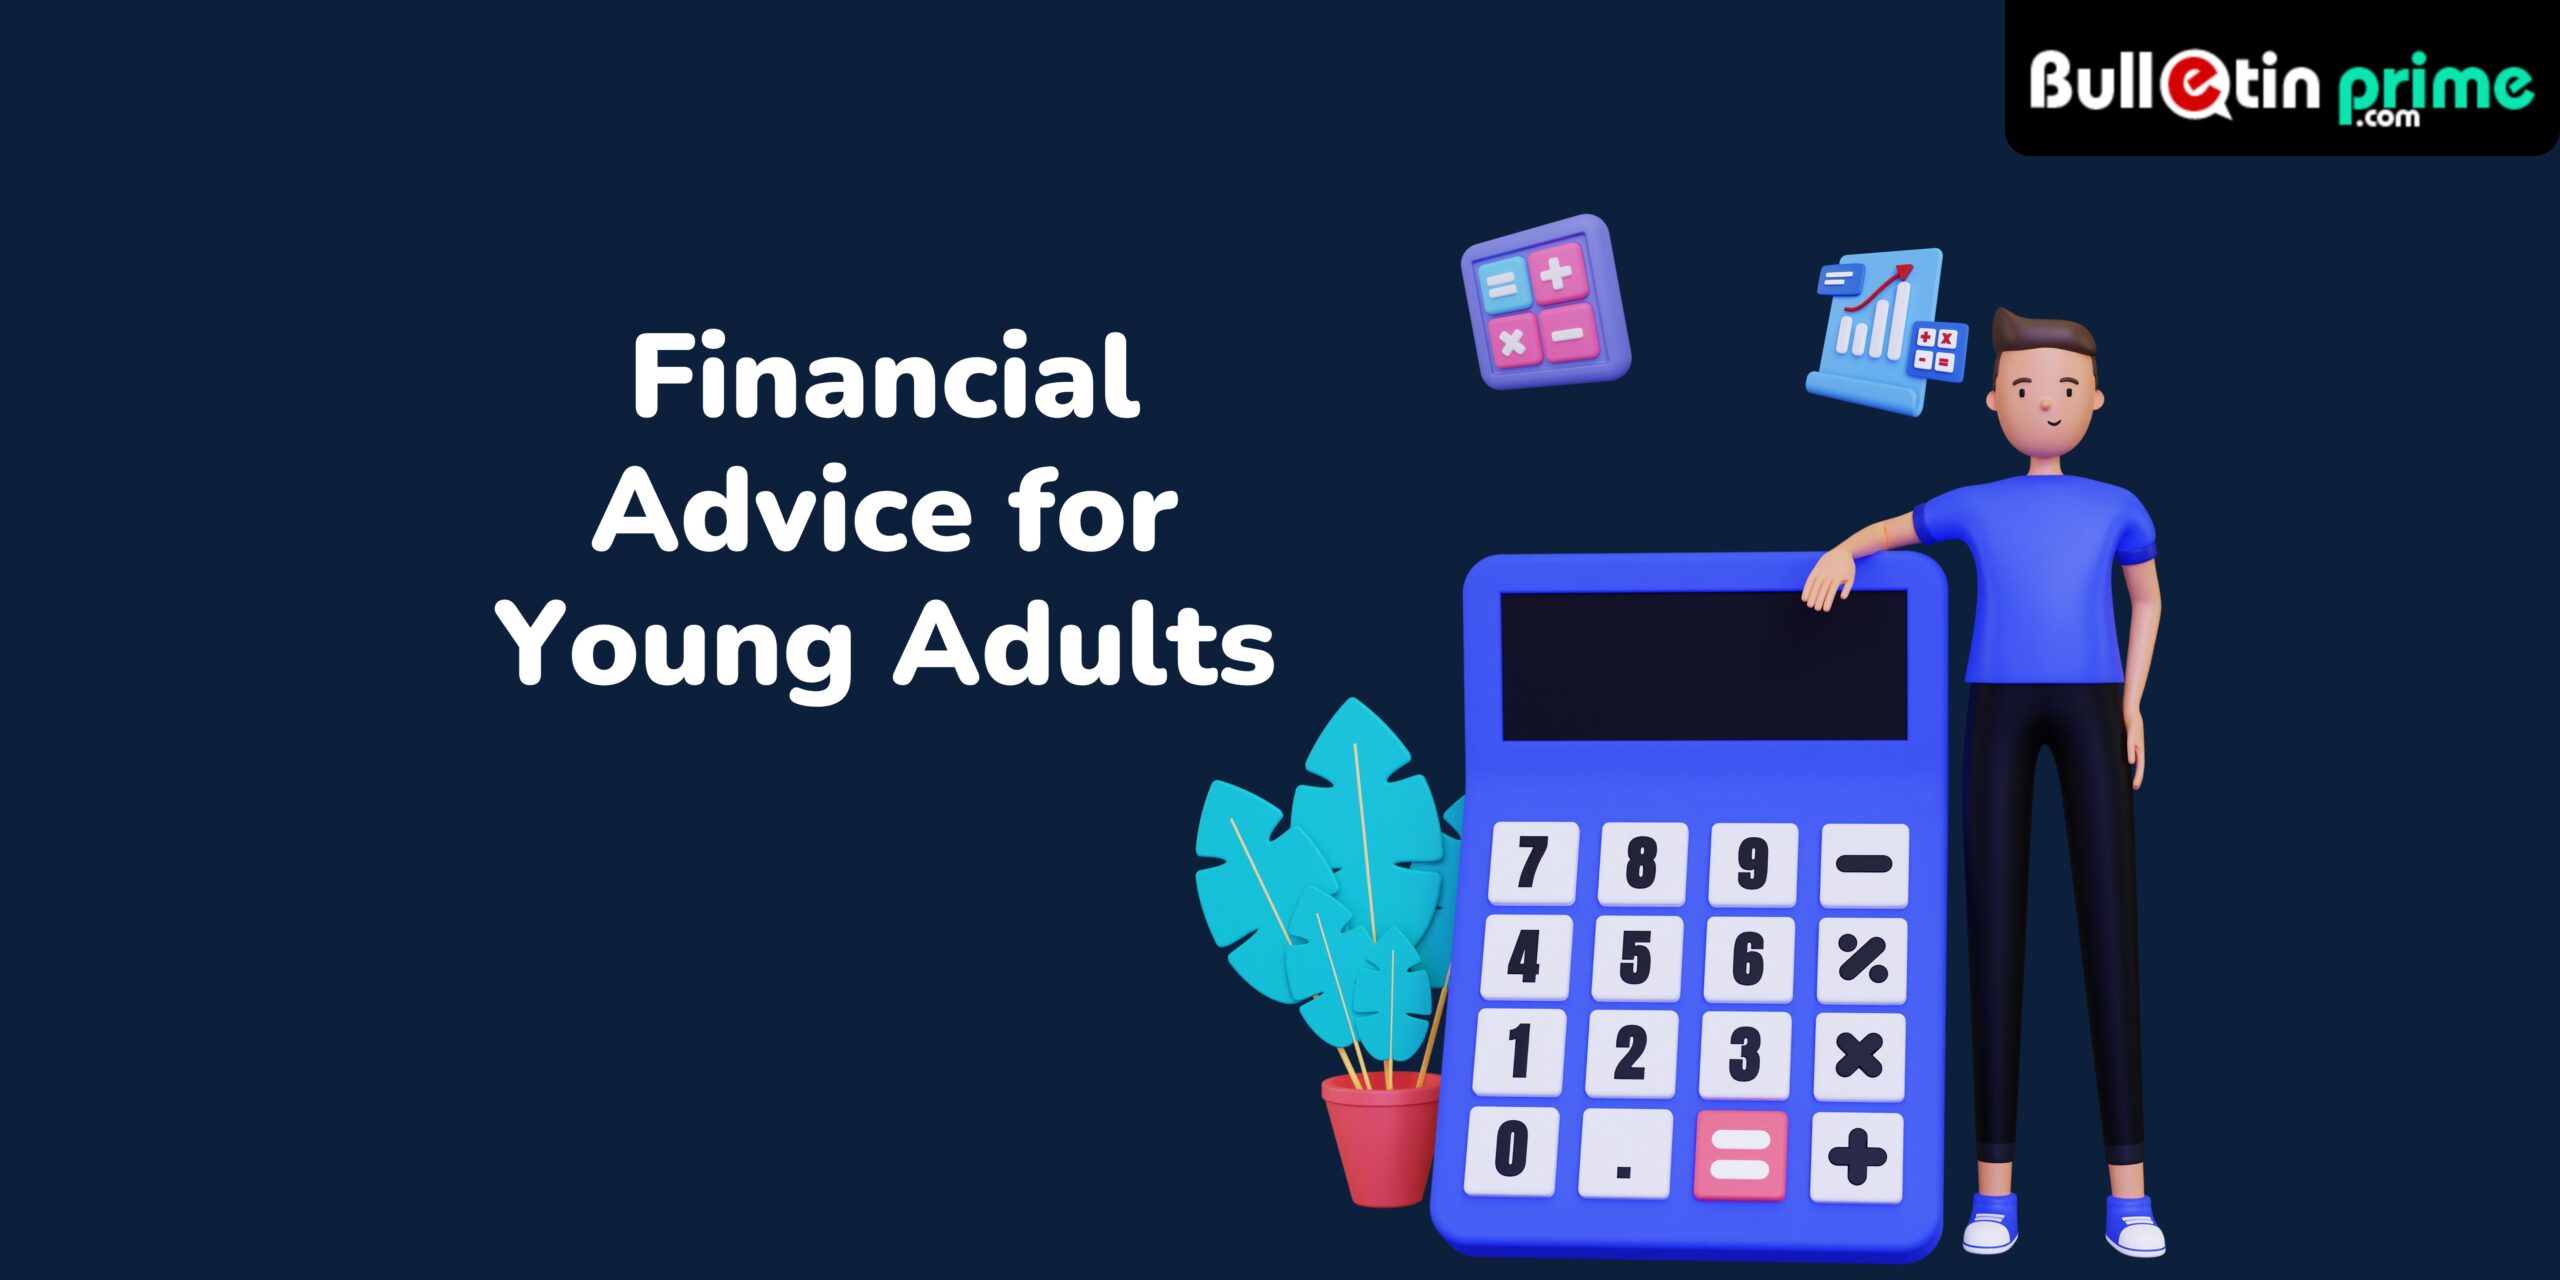 Financial Advice for Young Adults